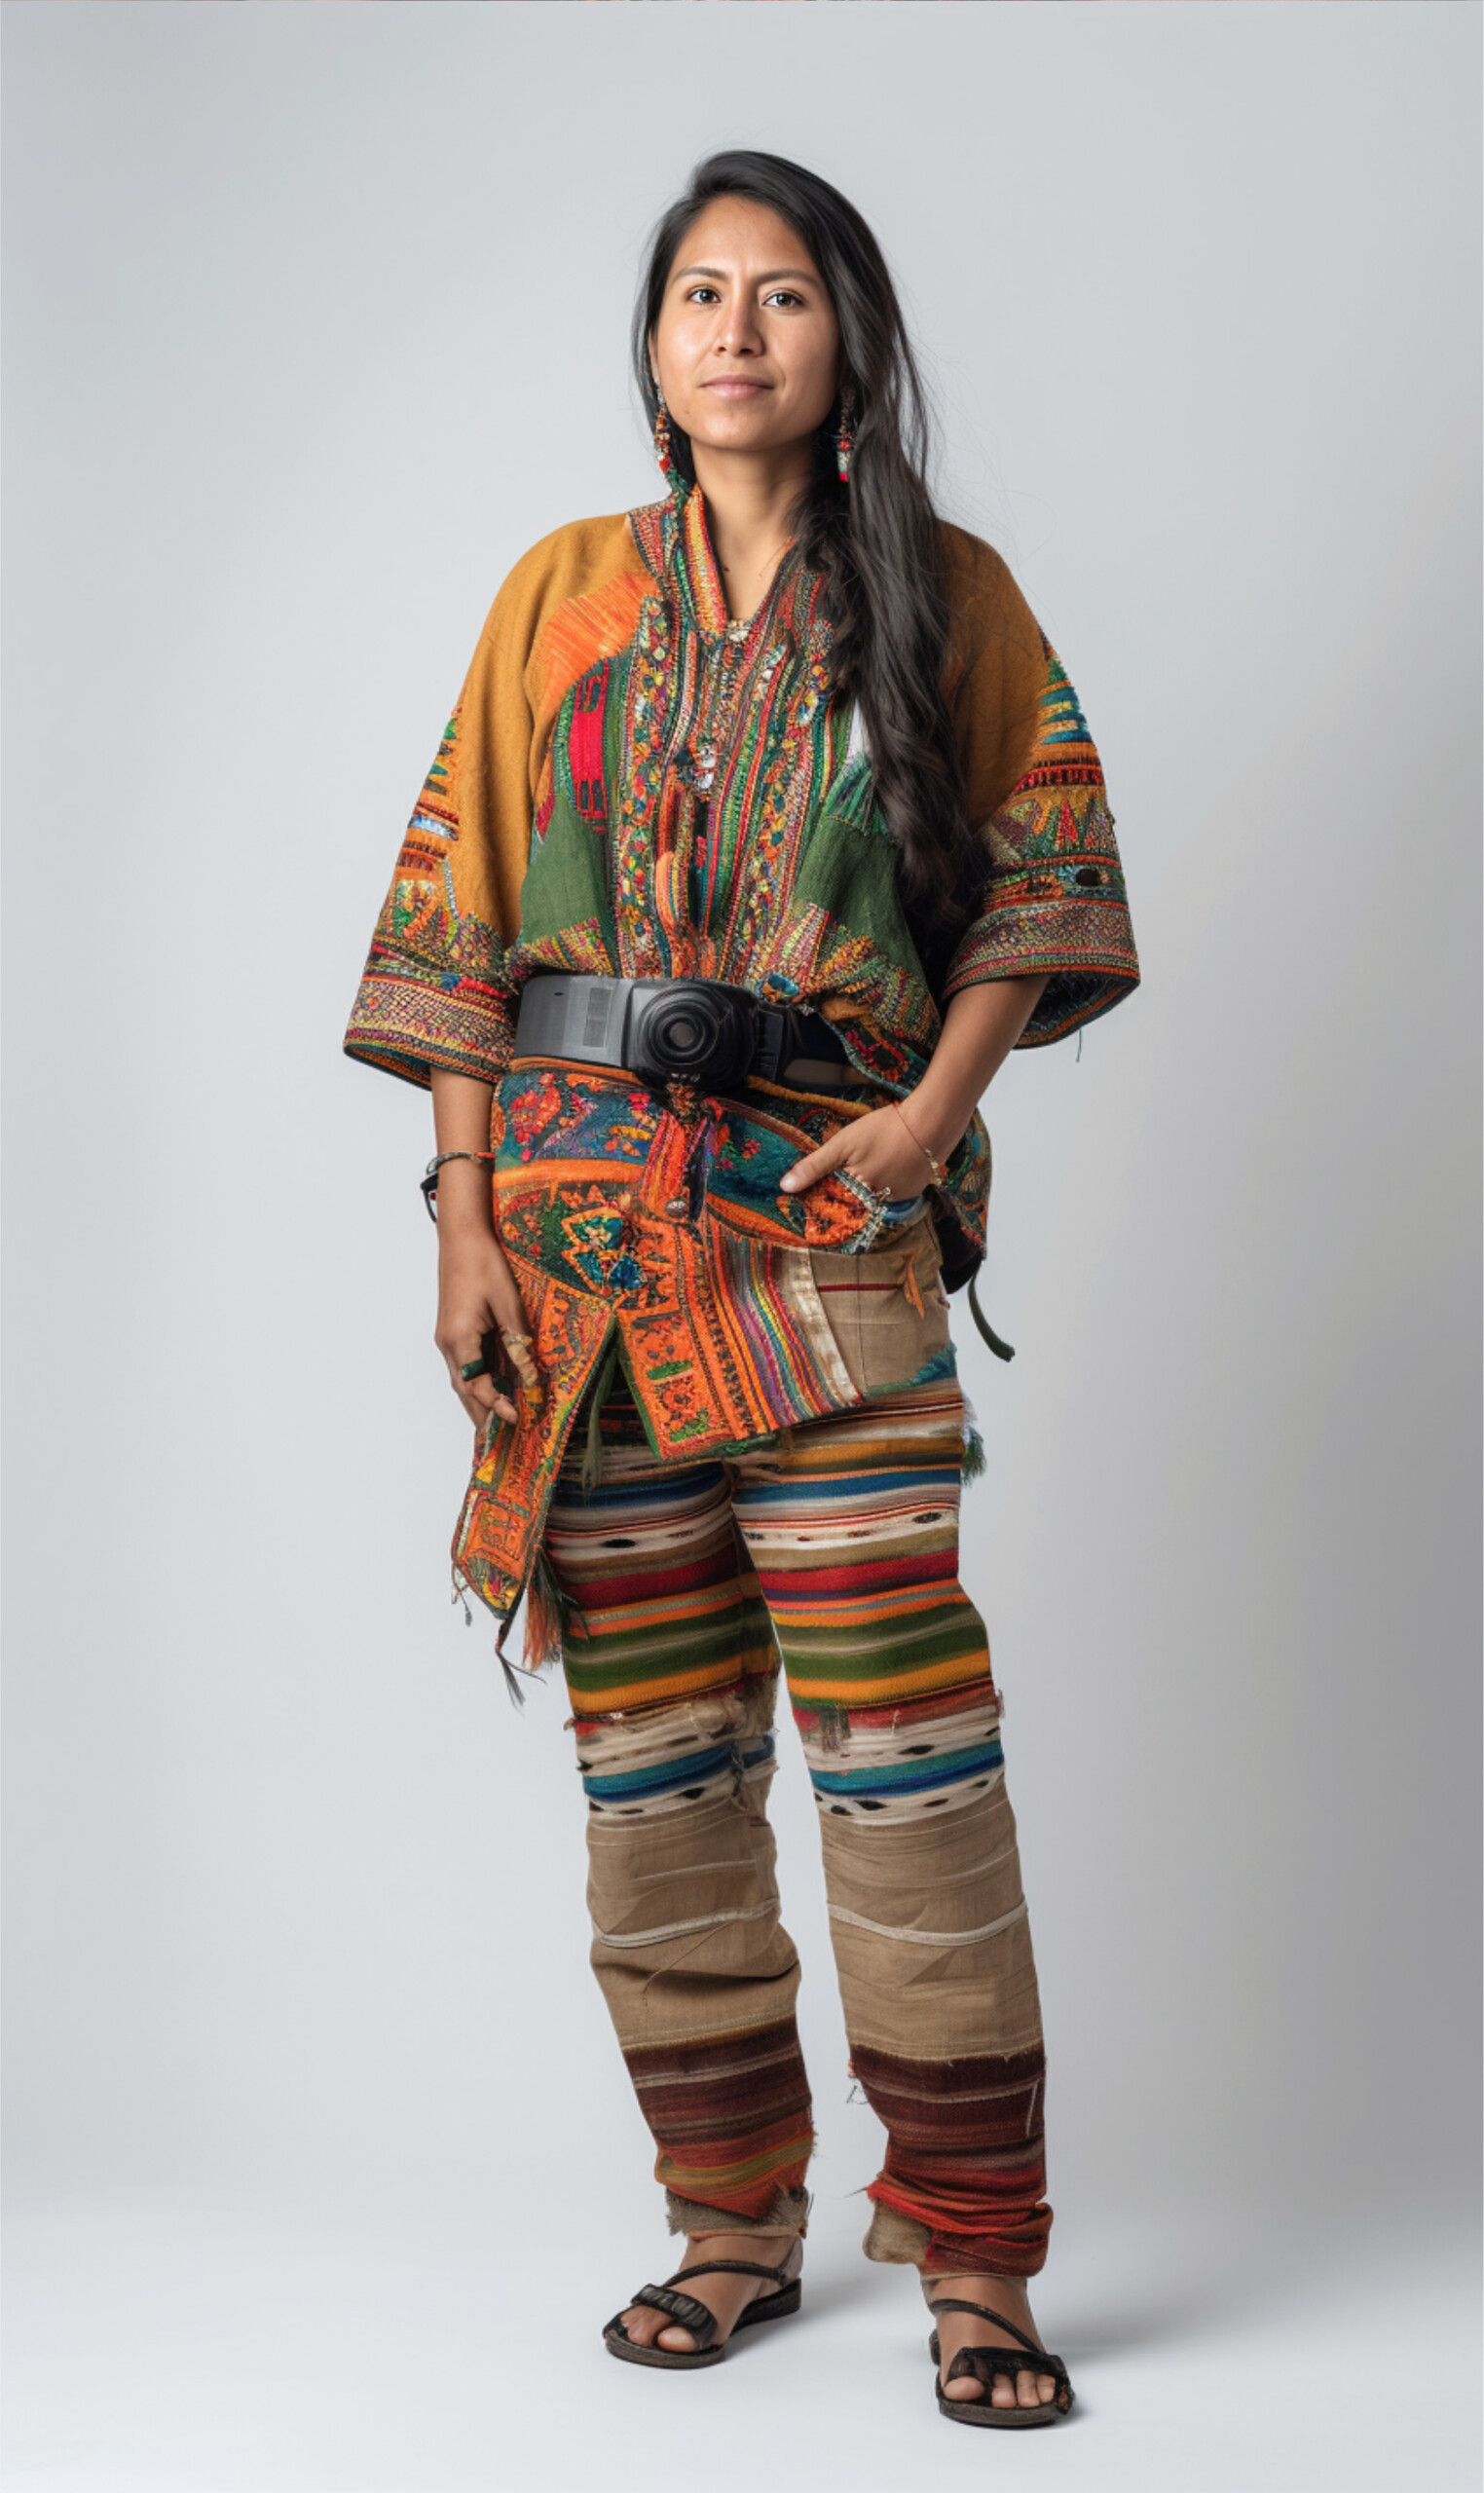 AI-generated image of a woman from Bolivia